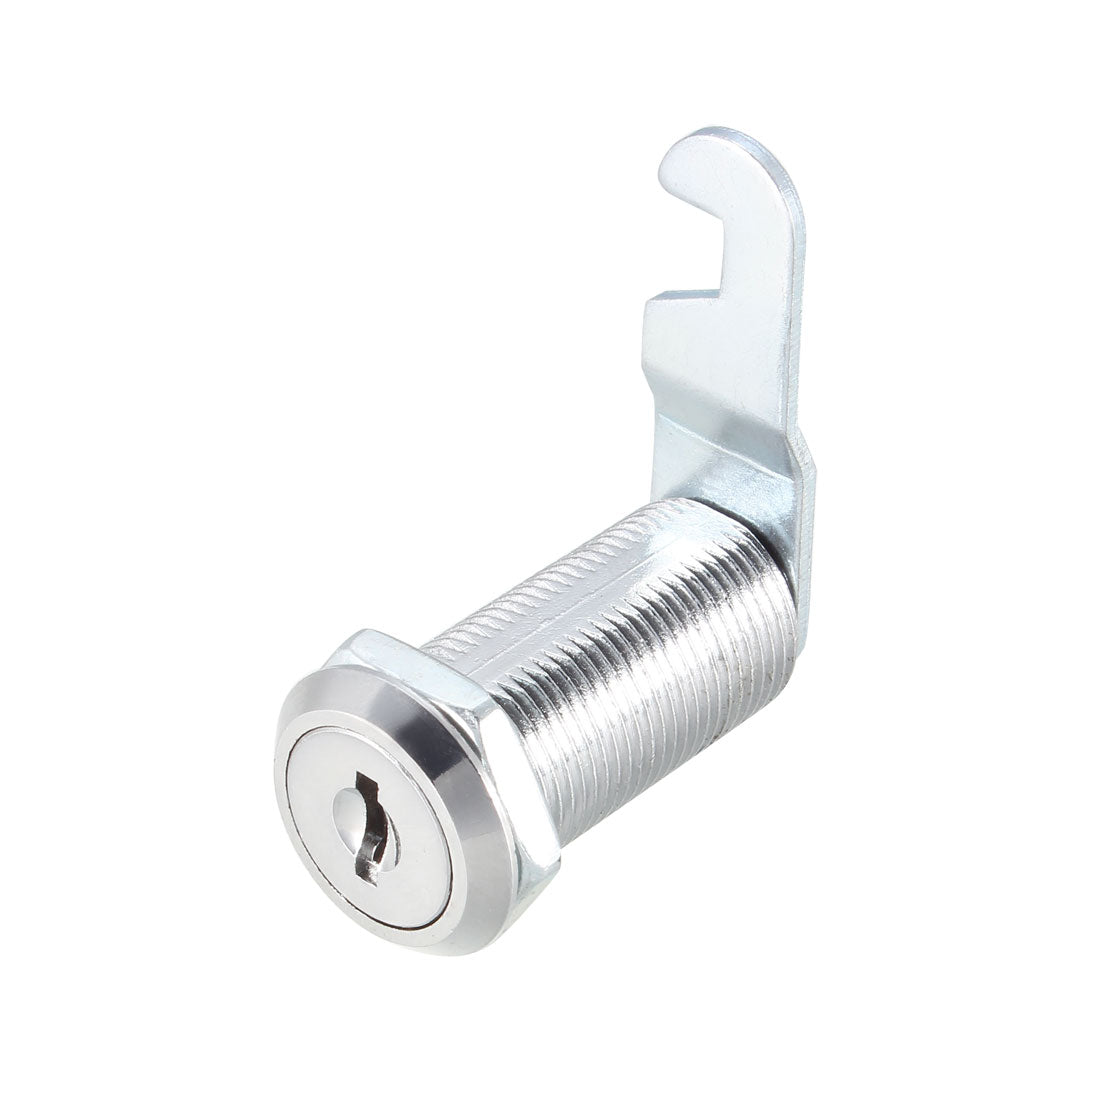 uxcell Uxcell Cam Lock 35mm Cylinder Length for Max 30mm Panel Keyed Different 2Pcs